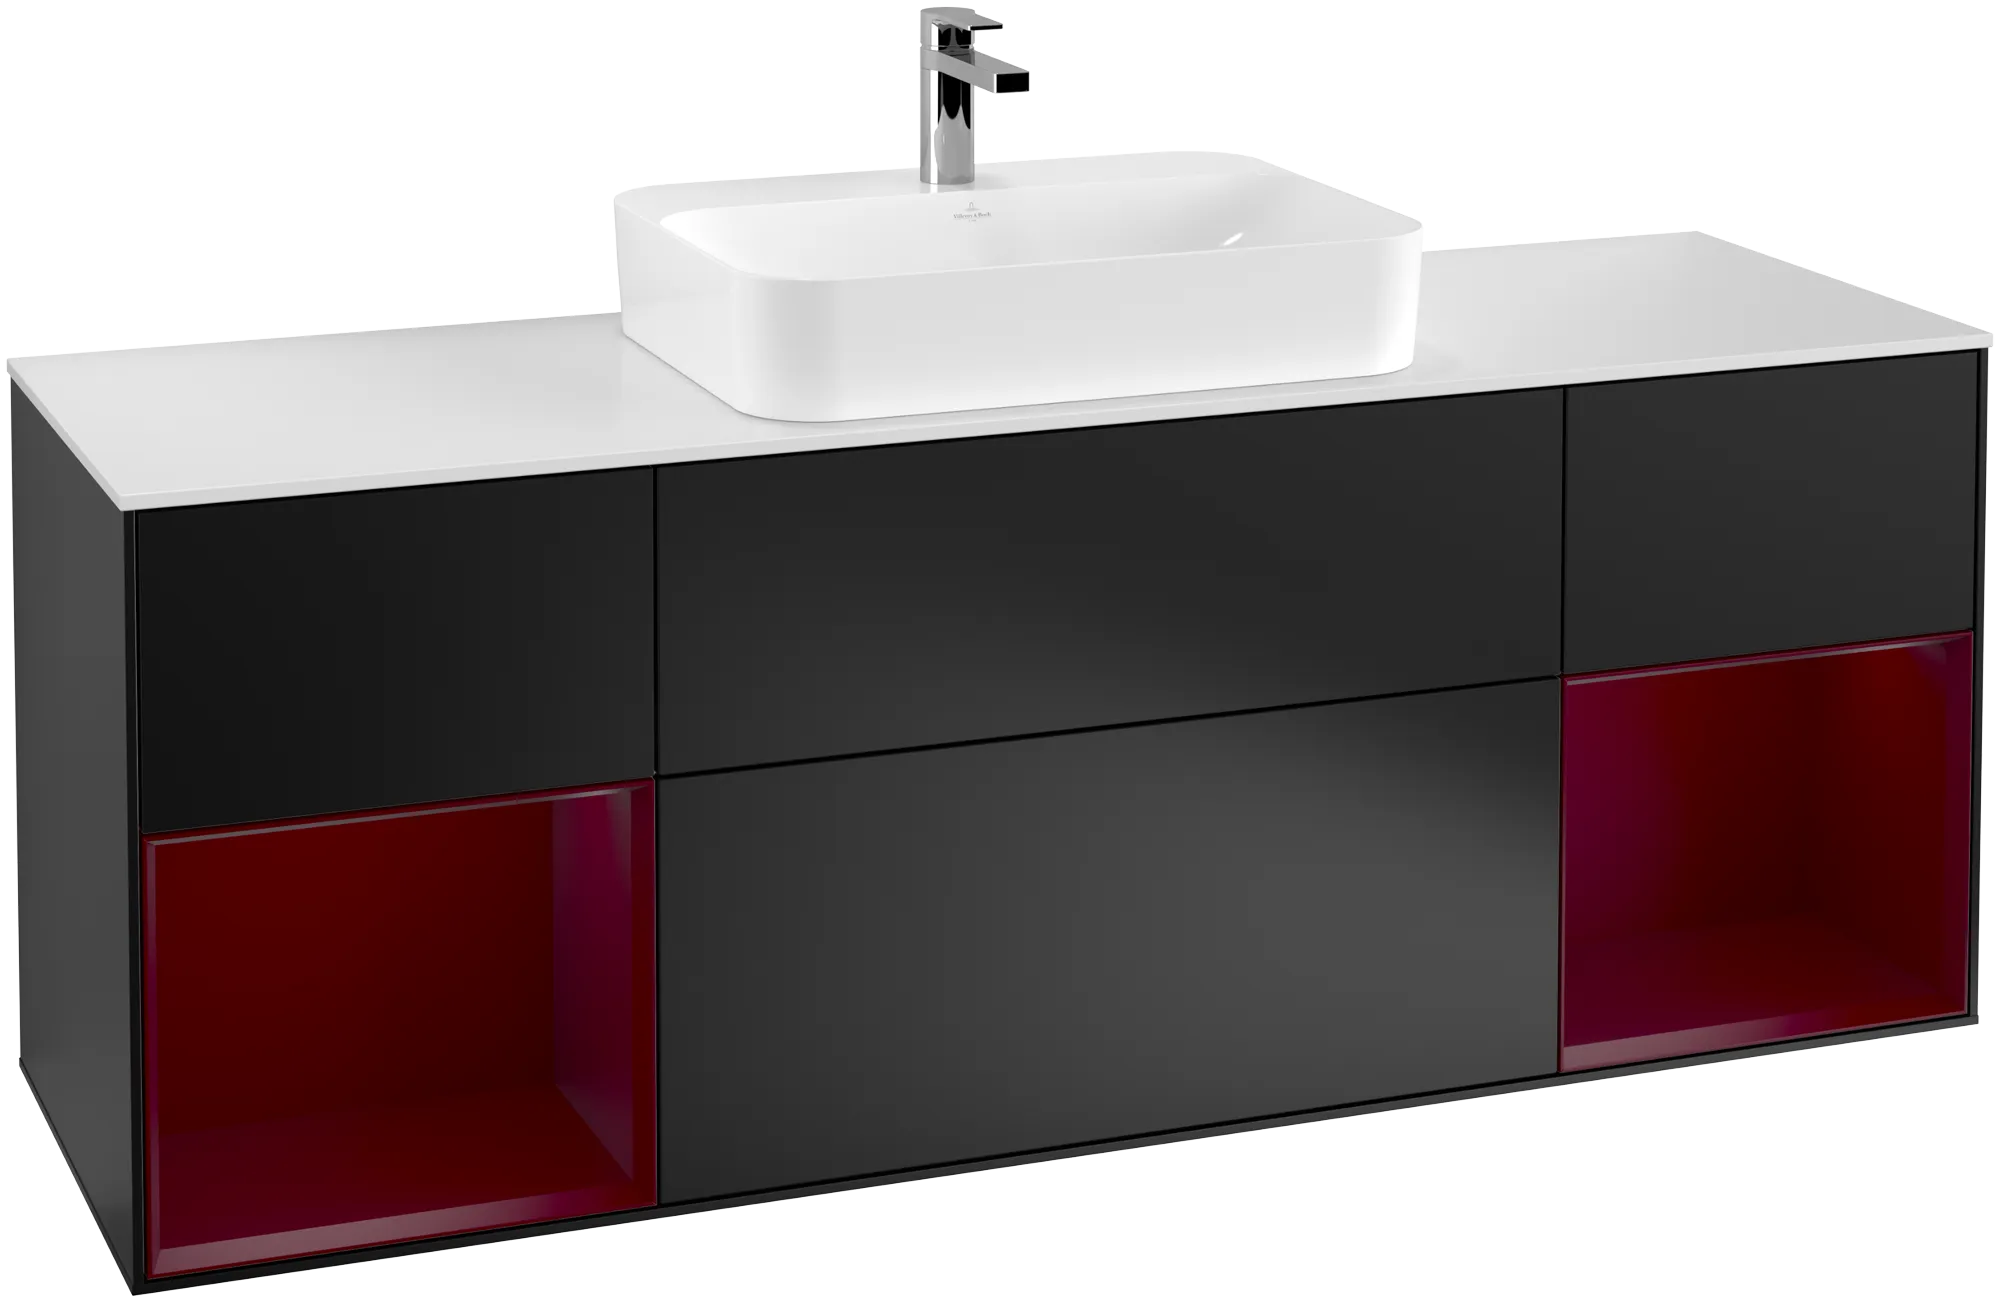 Picture of VILLEROY BOCH Finion Vanity unit, with lighting, 4 pull-out compartments, 1600 x 603 x 501 mm, Black Matt Lacquer / Peony Matt Lacquer / Glass White Matt #G451HBPD